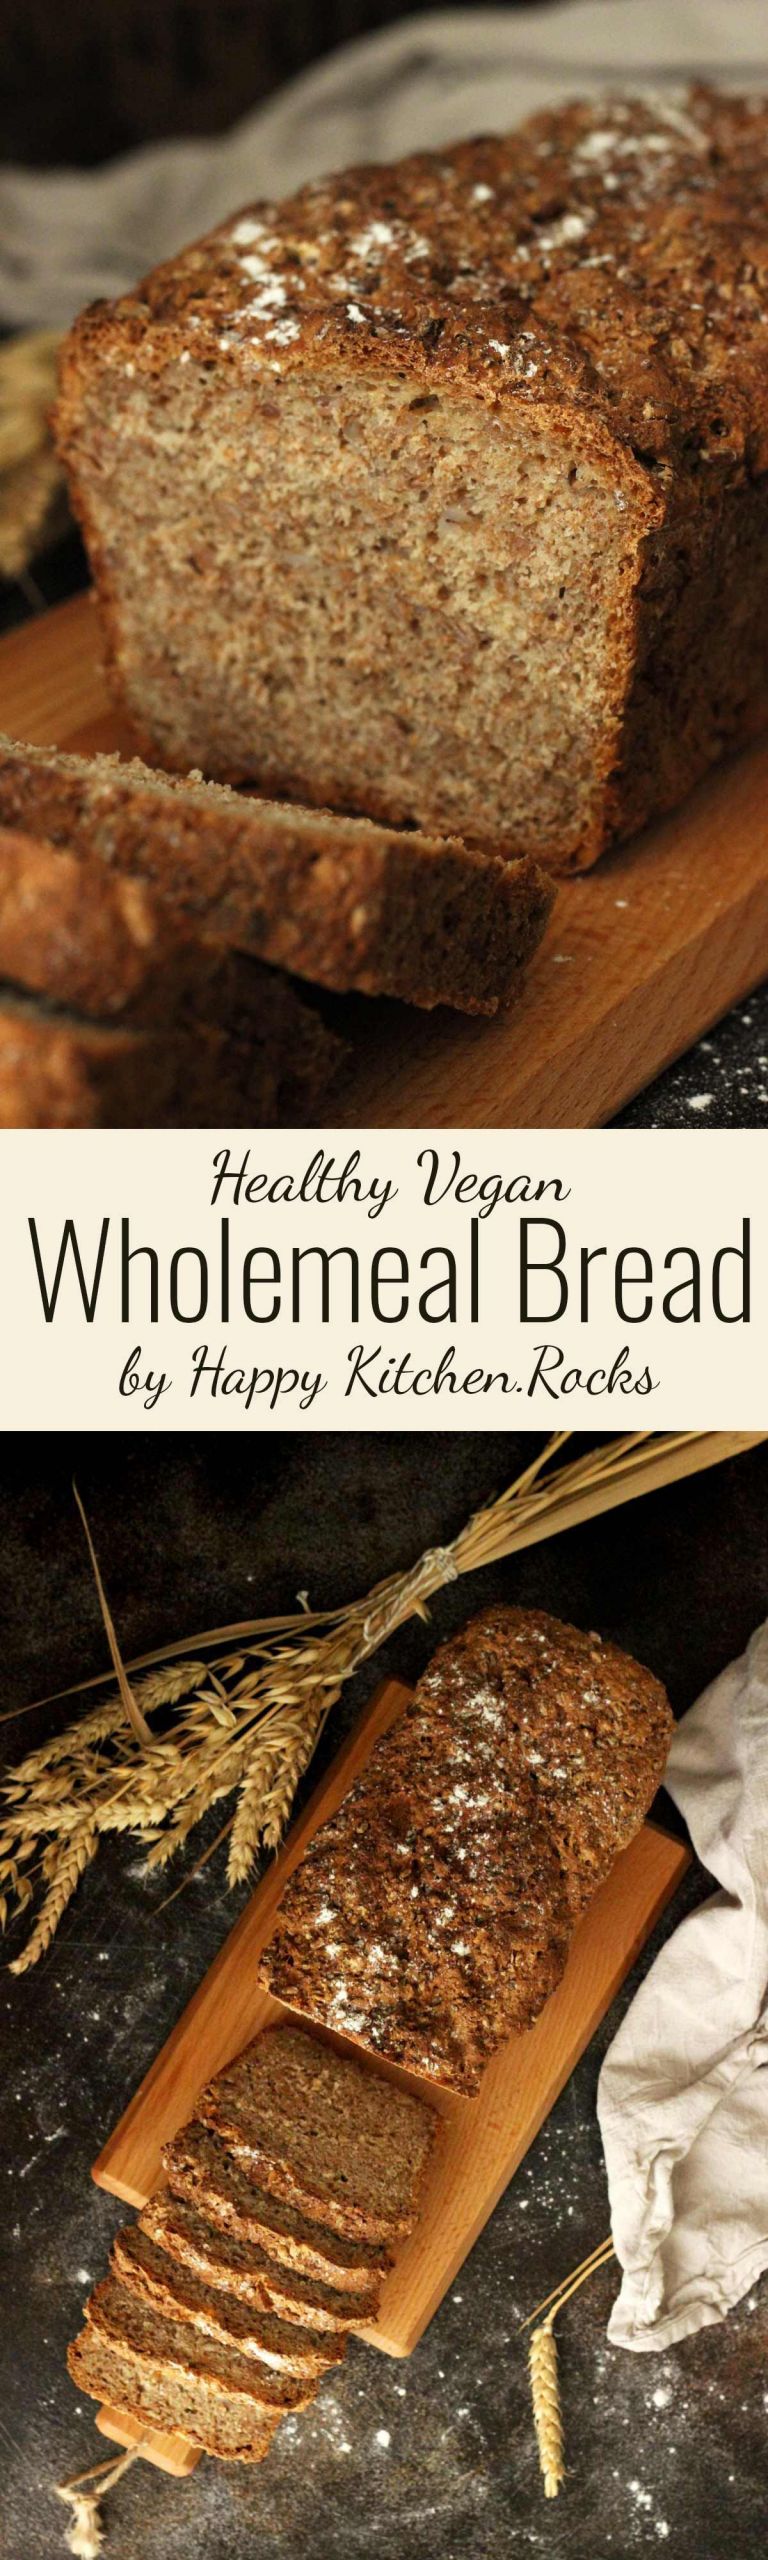 Healthiest Whole Grain Bread
 Healthy Wholemeal Bread recipe is vegan simple and just